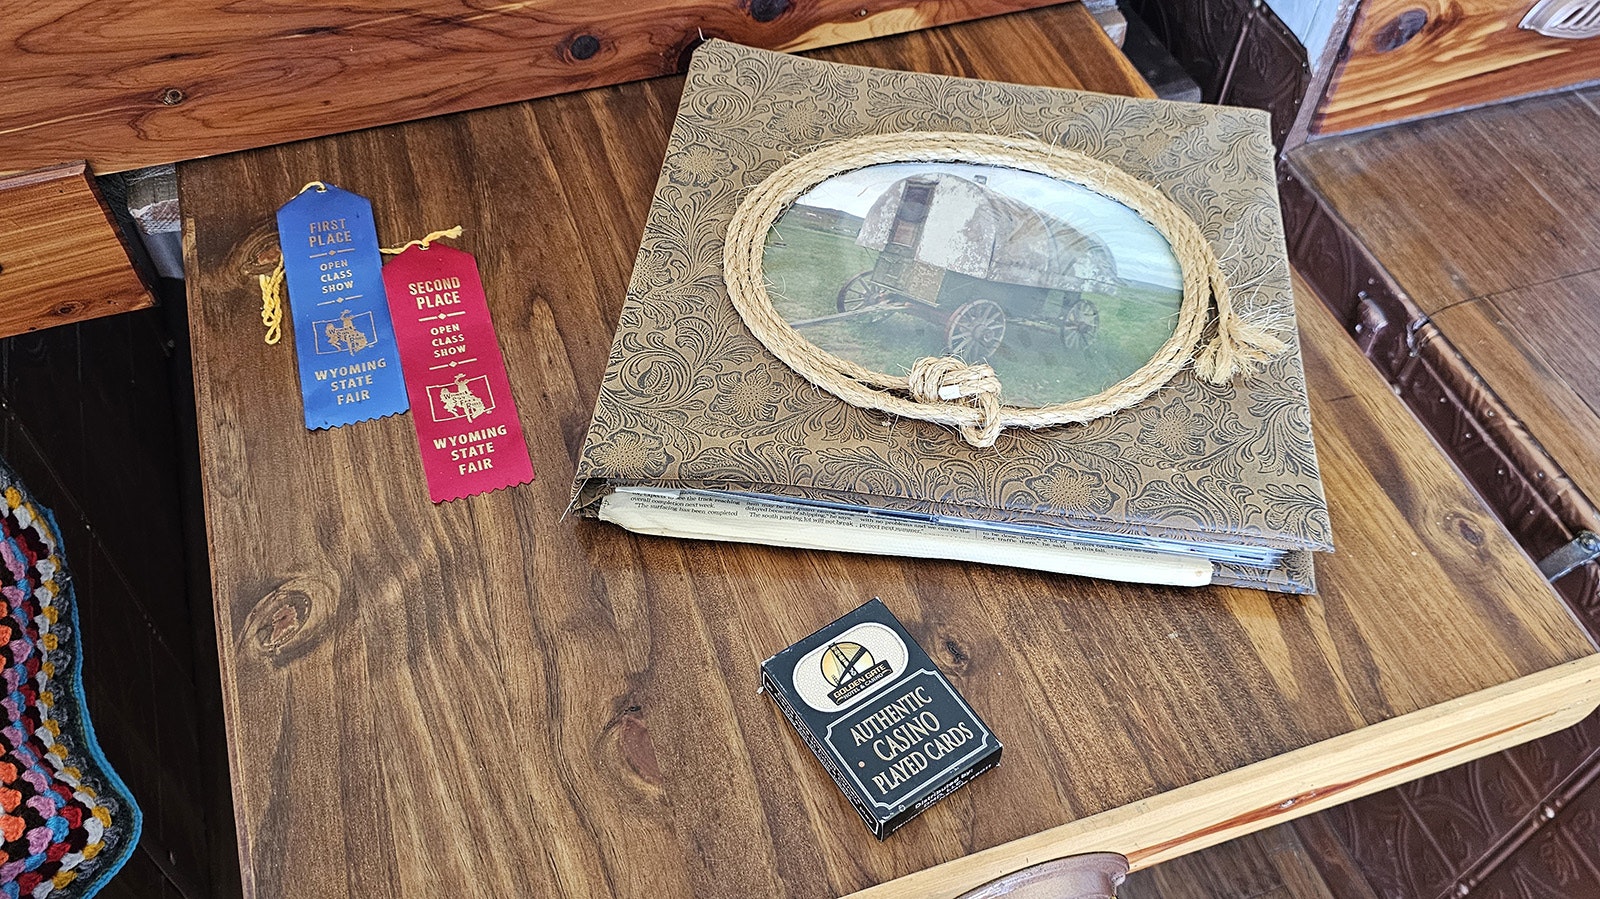 A scrapbook about The Pearl, along with two of its Wyoming State Fair ribbons.